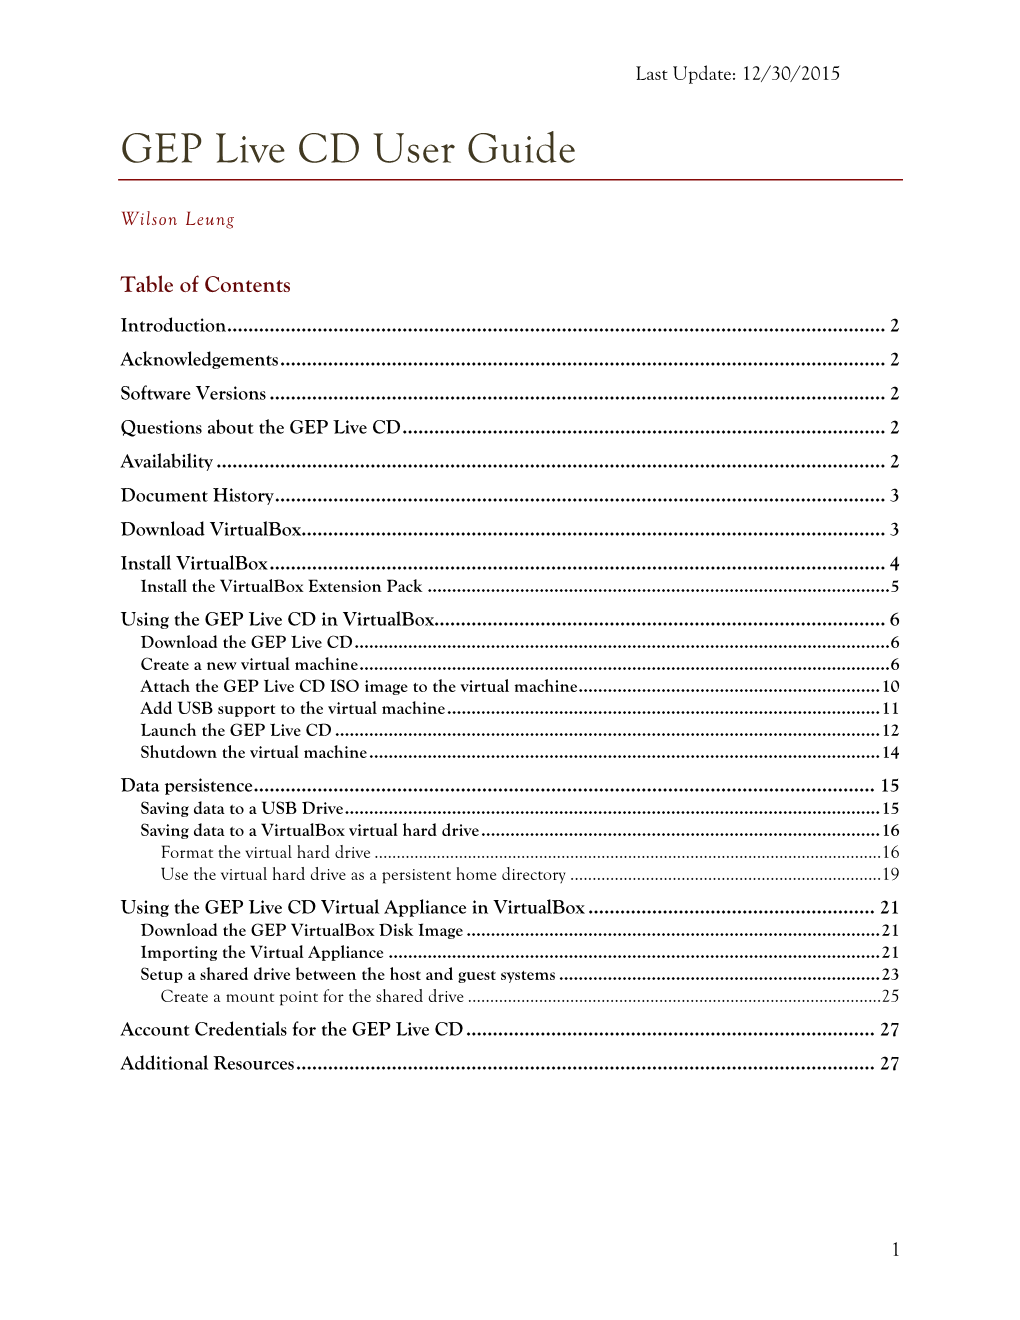 GEP Live CD User Guide